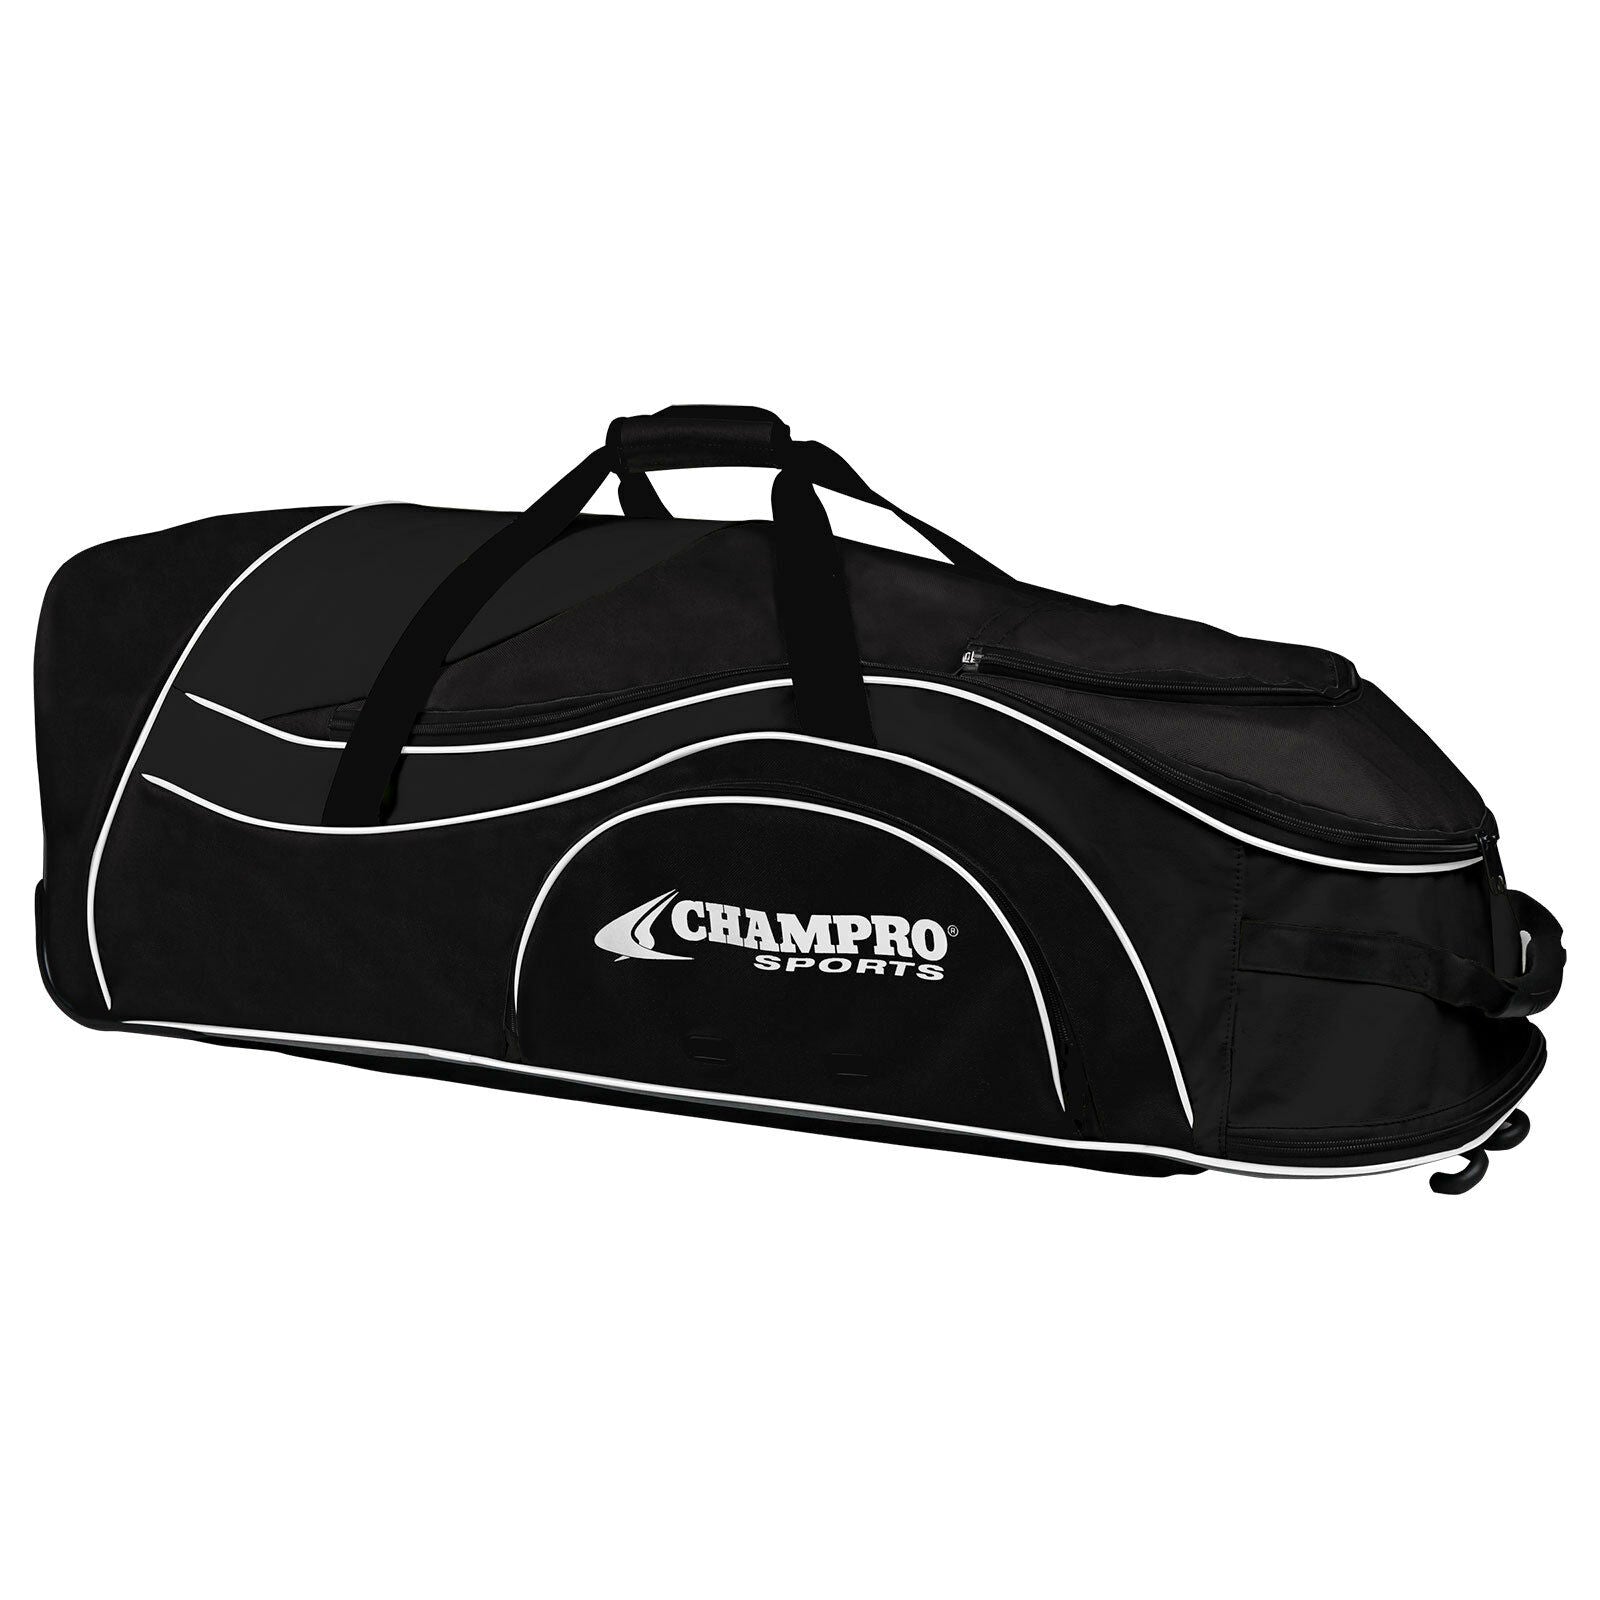 CHAMPRO E78 CATCHER'S  ROLLING GEAR BAG (NAVY 0NLY)